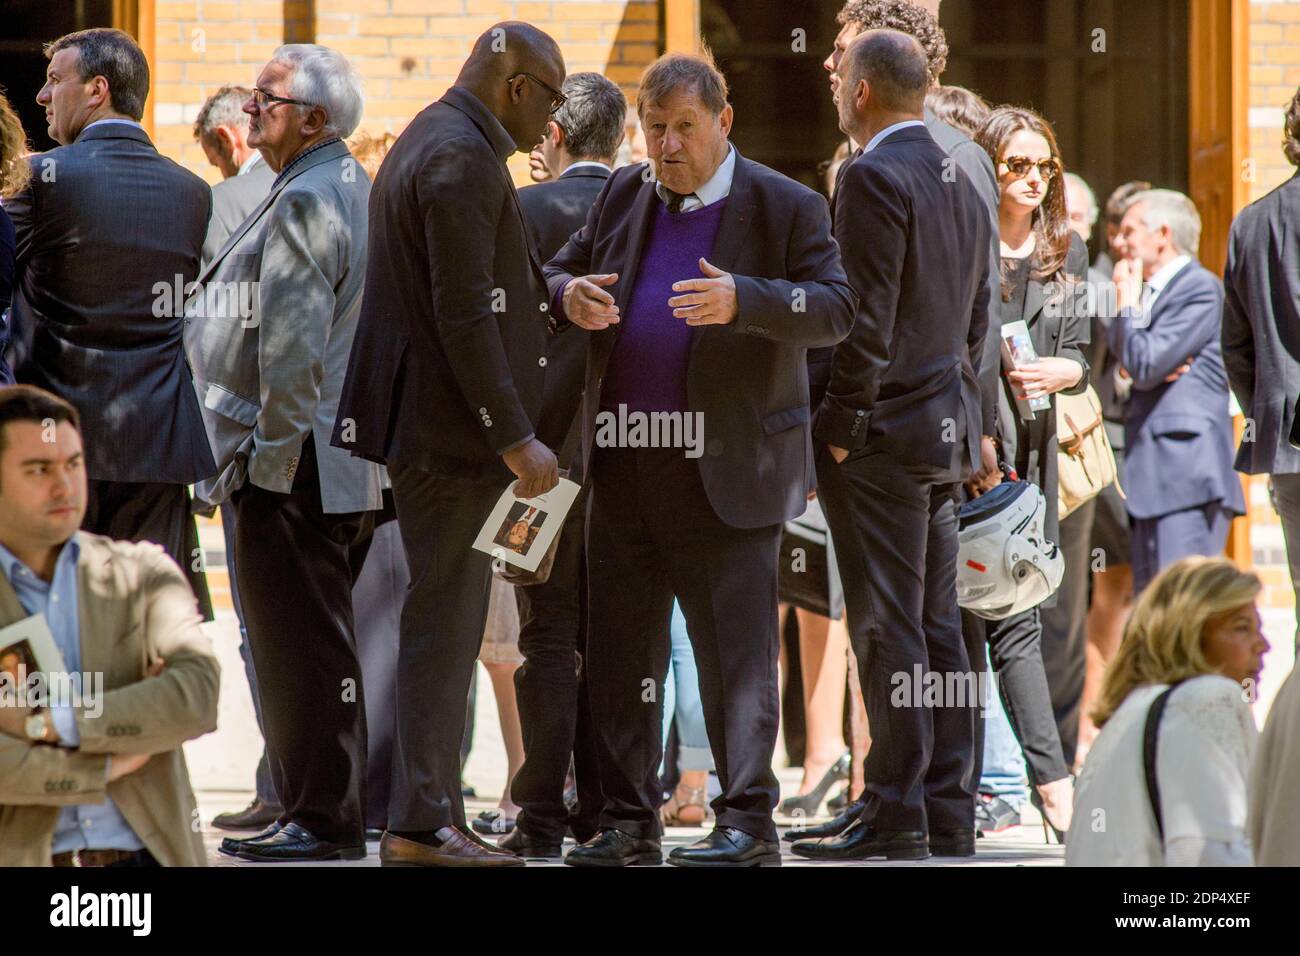 Guy Roux attending the funeral of Emmanuel Limido held at the Saint-Honore d'Eylau Church in Paris, France on June 8, 2015. Photo by Axel Renaud/ABACAPRESS.COM Stock Photo